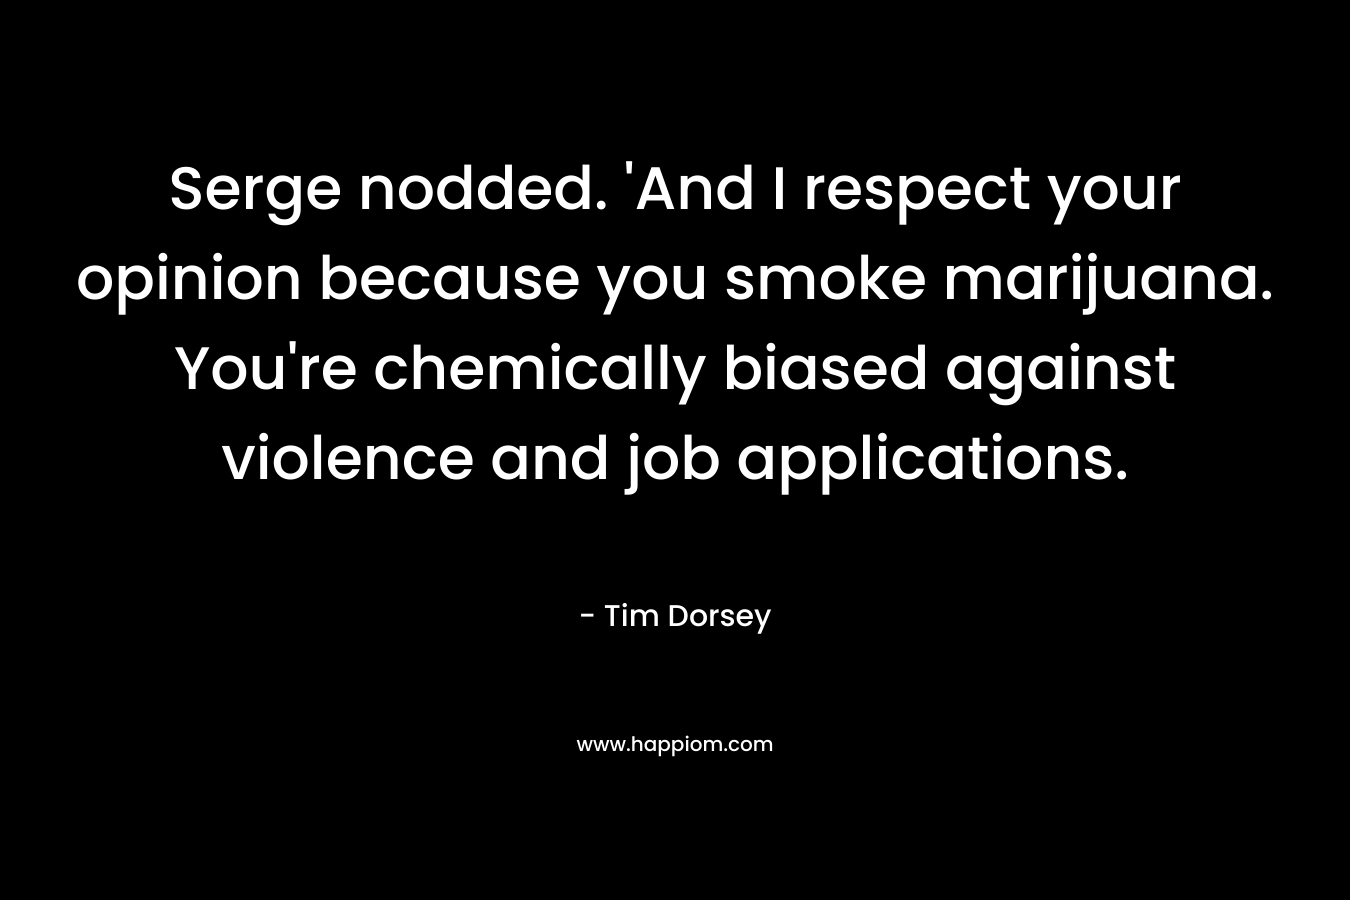 Serge nodded. ‘And I respect your opinion because you smoke marijuana. You’re chemically biased against violence and job applications. – Tim Dorsey